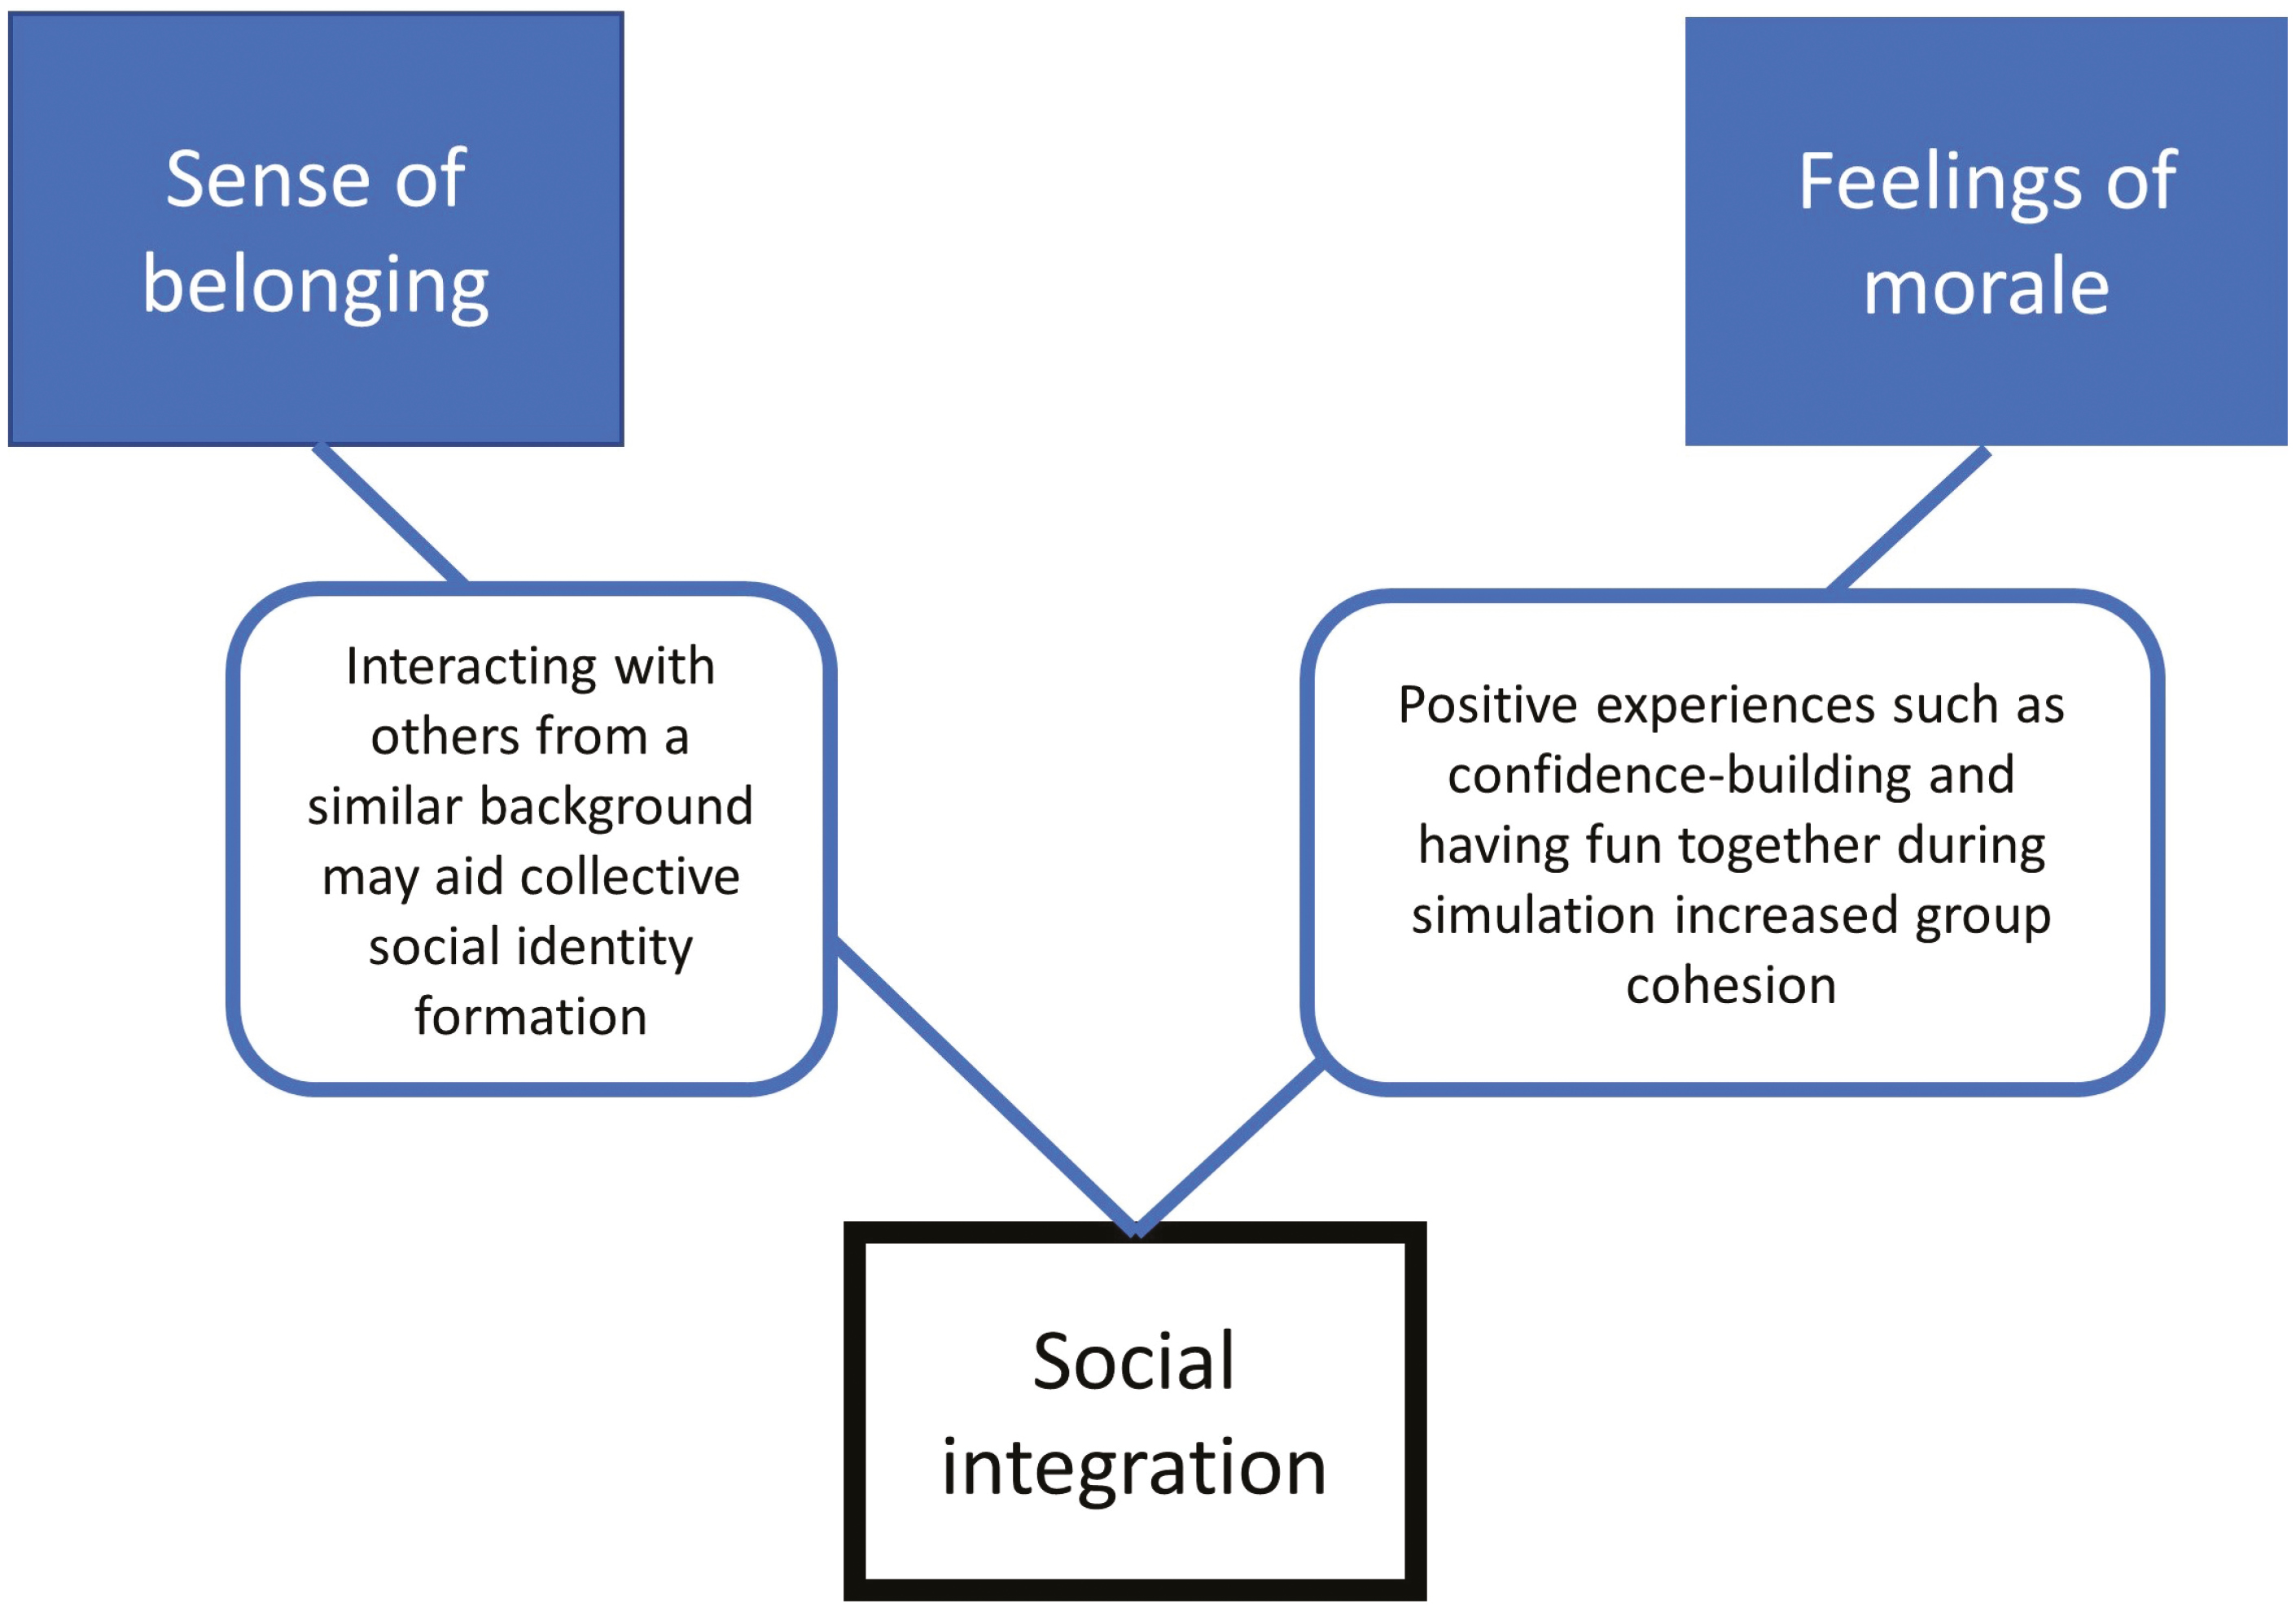 Bollen and Hoyle’s two dimensions of group cohesion, as applied to the IMT boot camp.